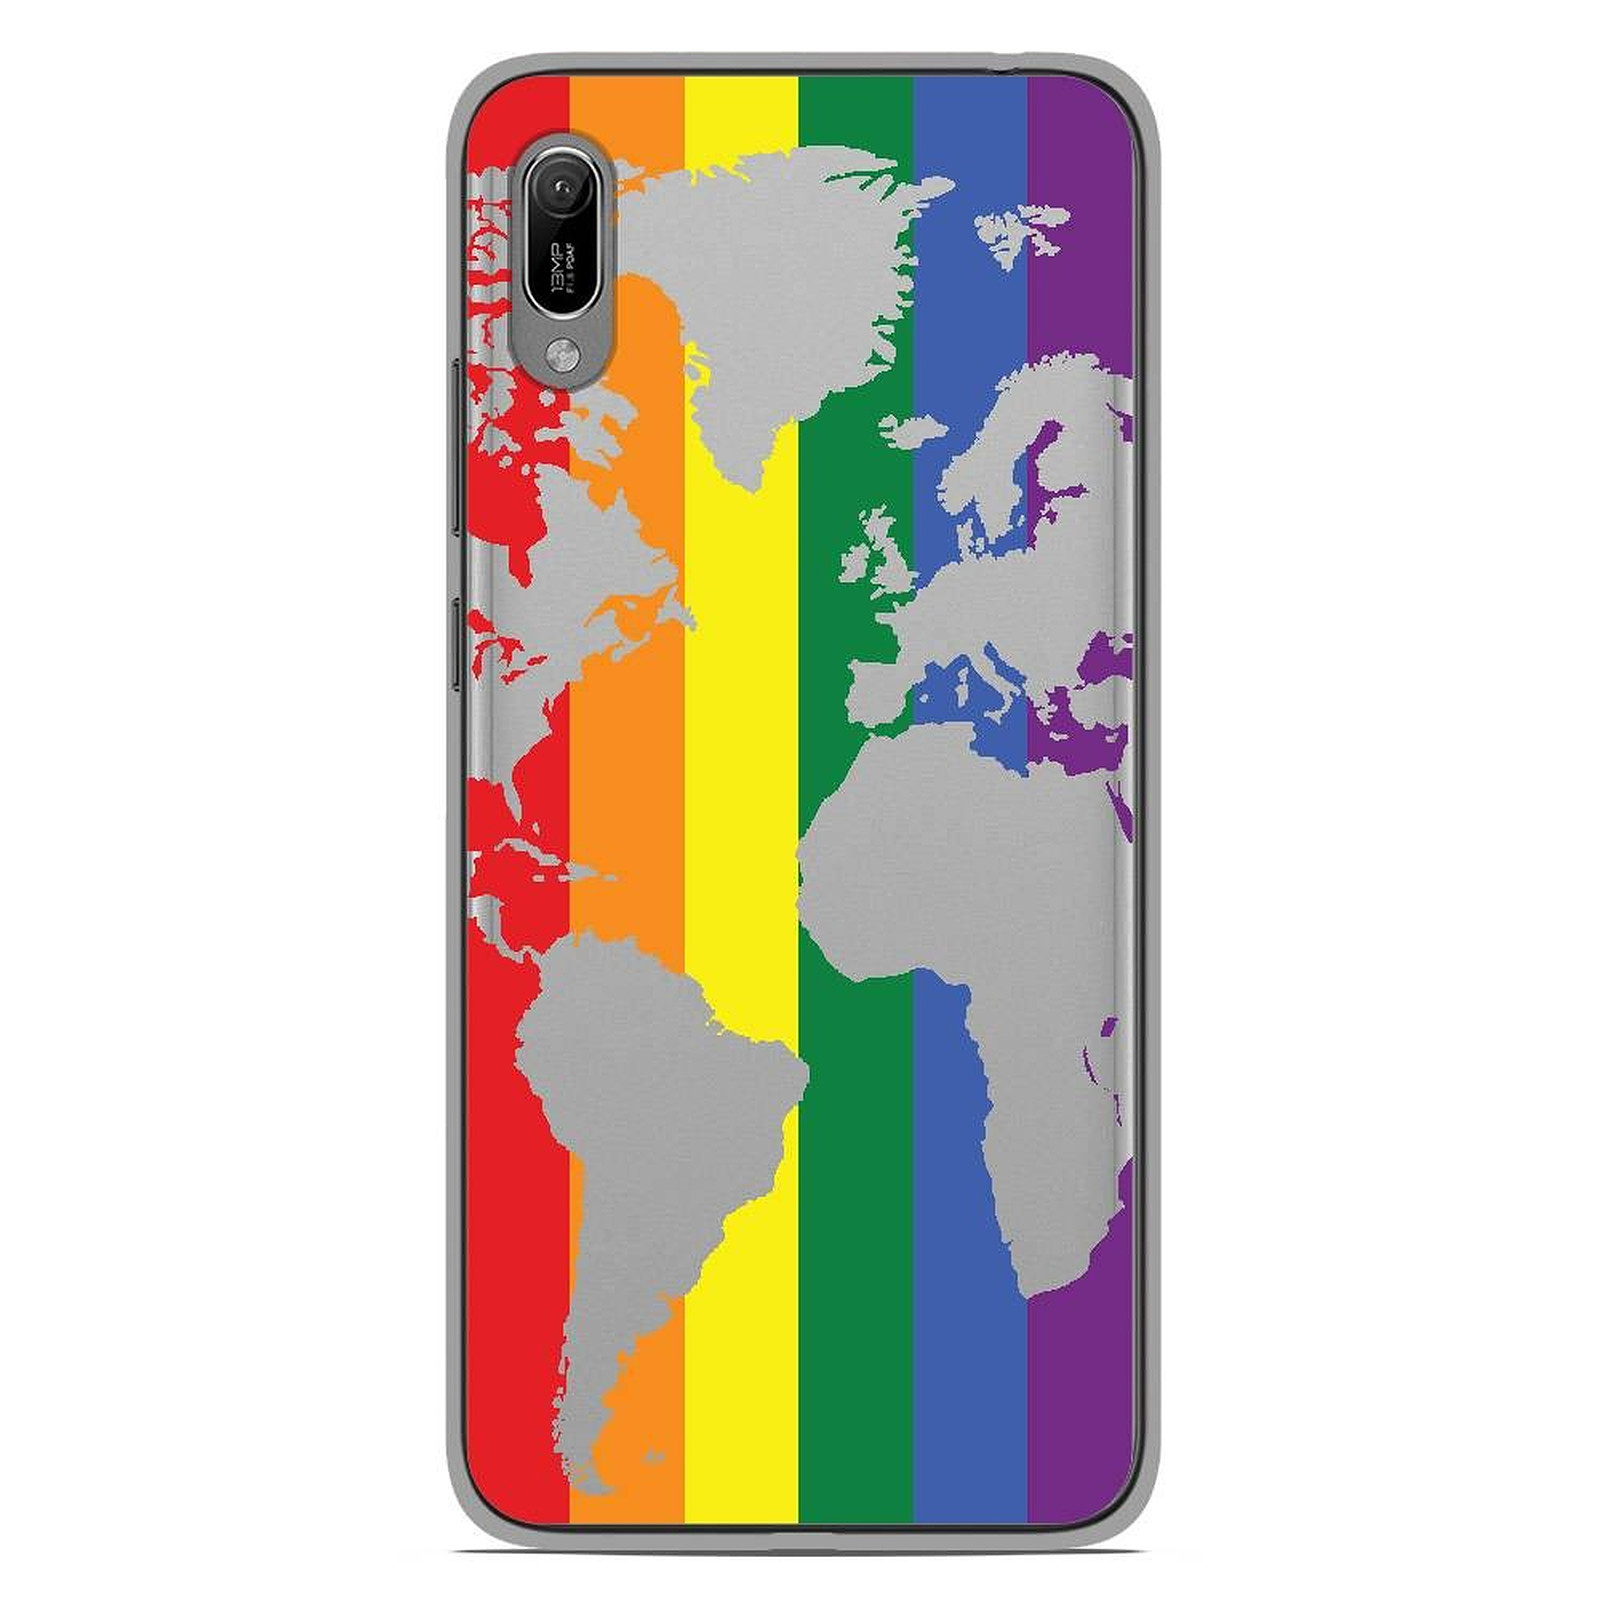 1001 Coques Coque silicone gel Huawei Y6 2019 motif Map LGBT - Coque telephone 1001Coques